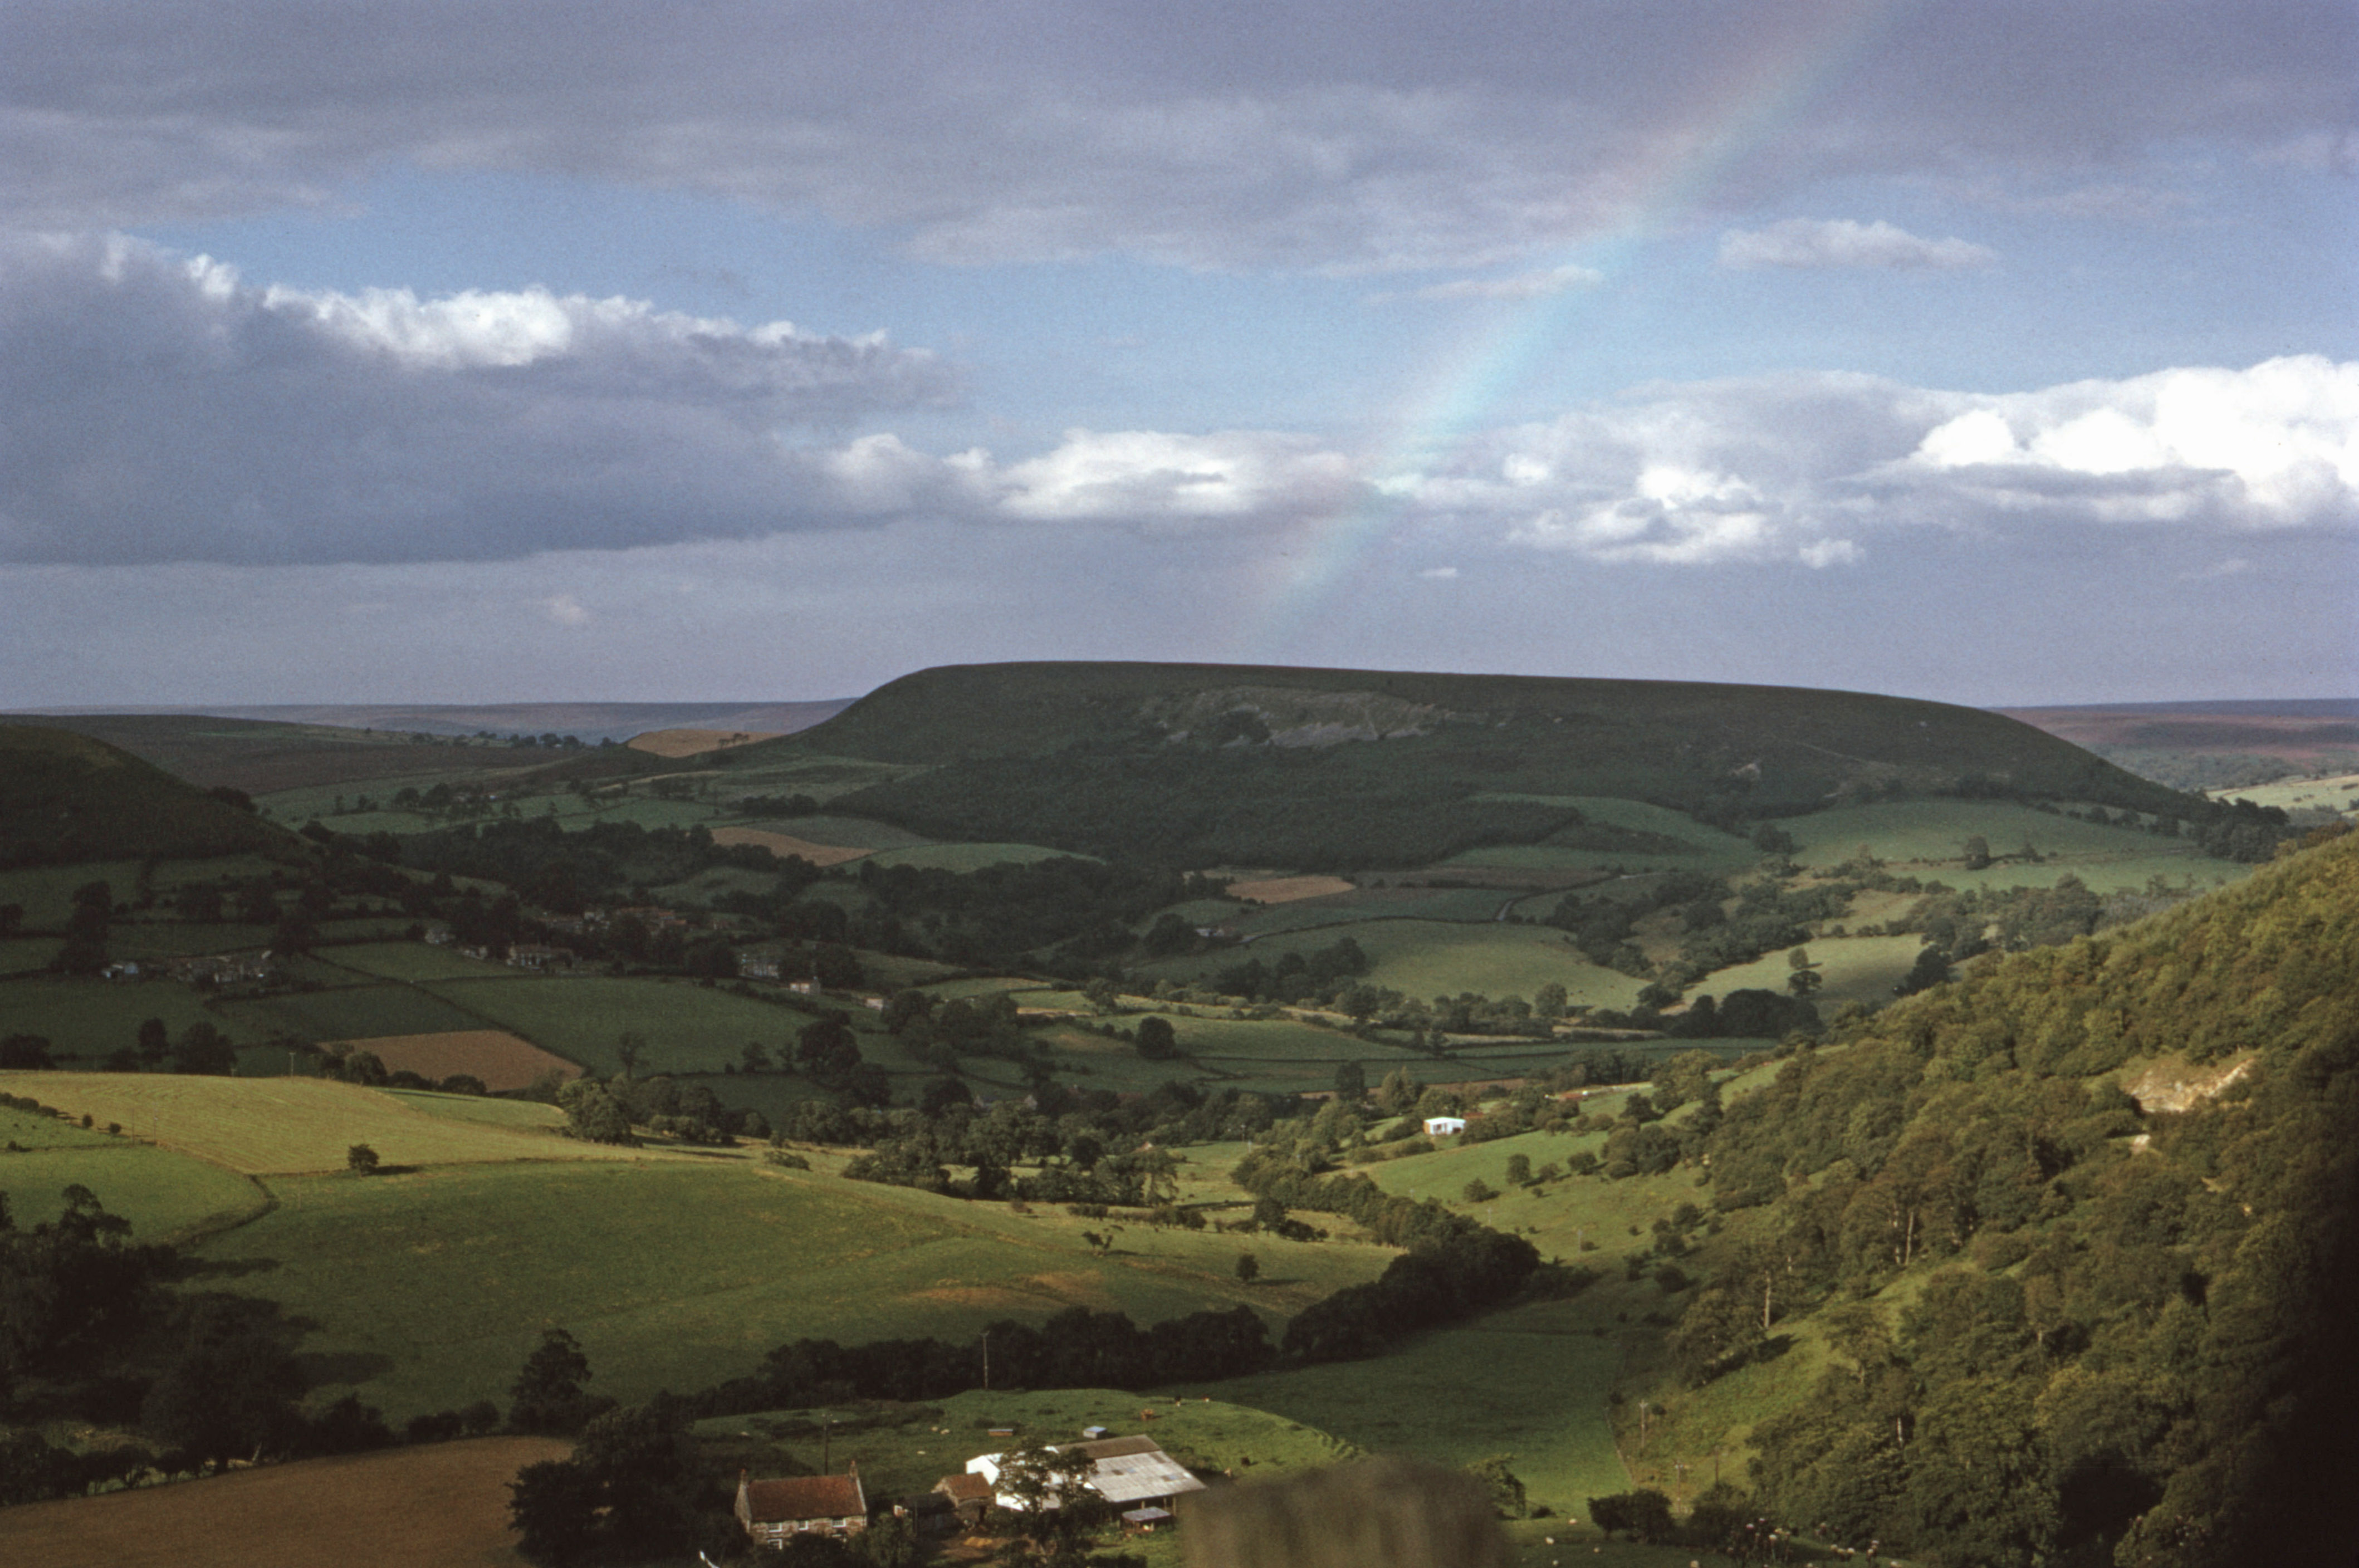 7404425 August 1974 - The local countryside - with a rainbow!